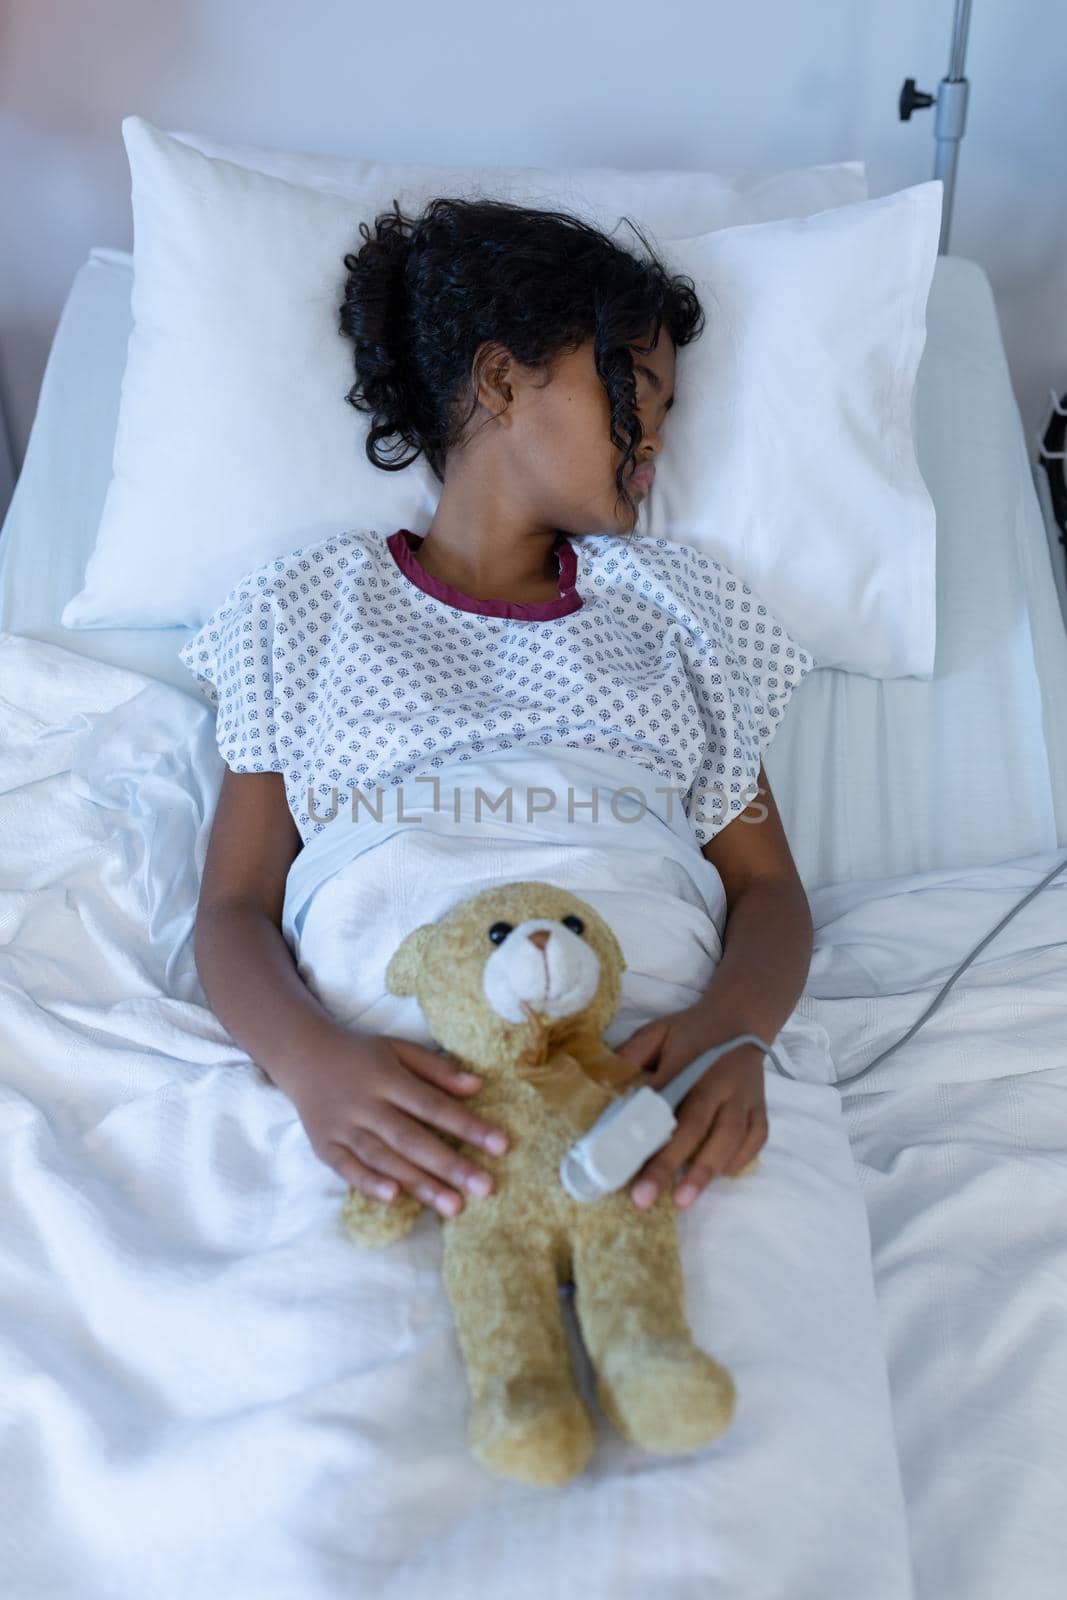 Sick mixed race girl asleep in hospital bed wearing fingertip pulse oximeter and holding teddy bear. medicine, health and healthcare services.